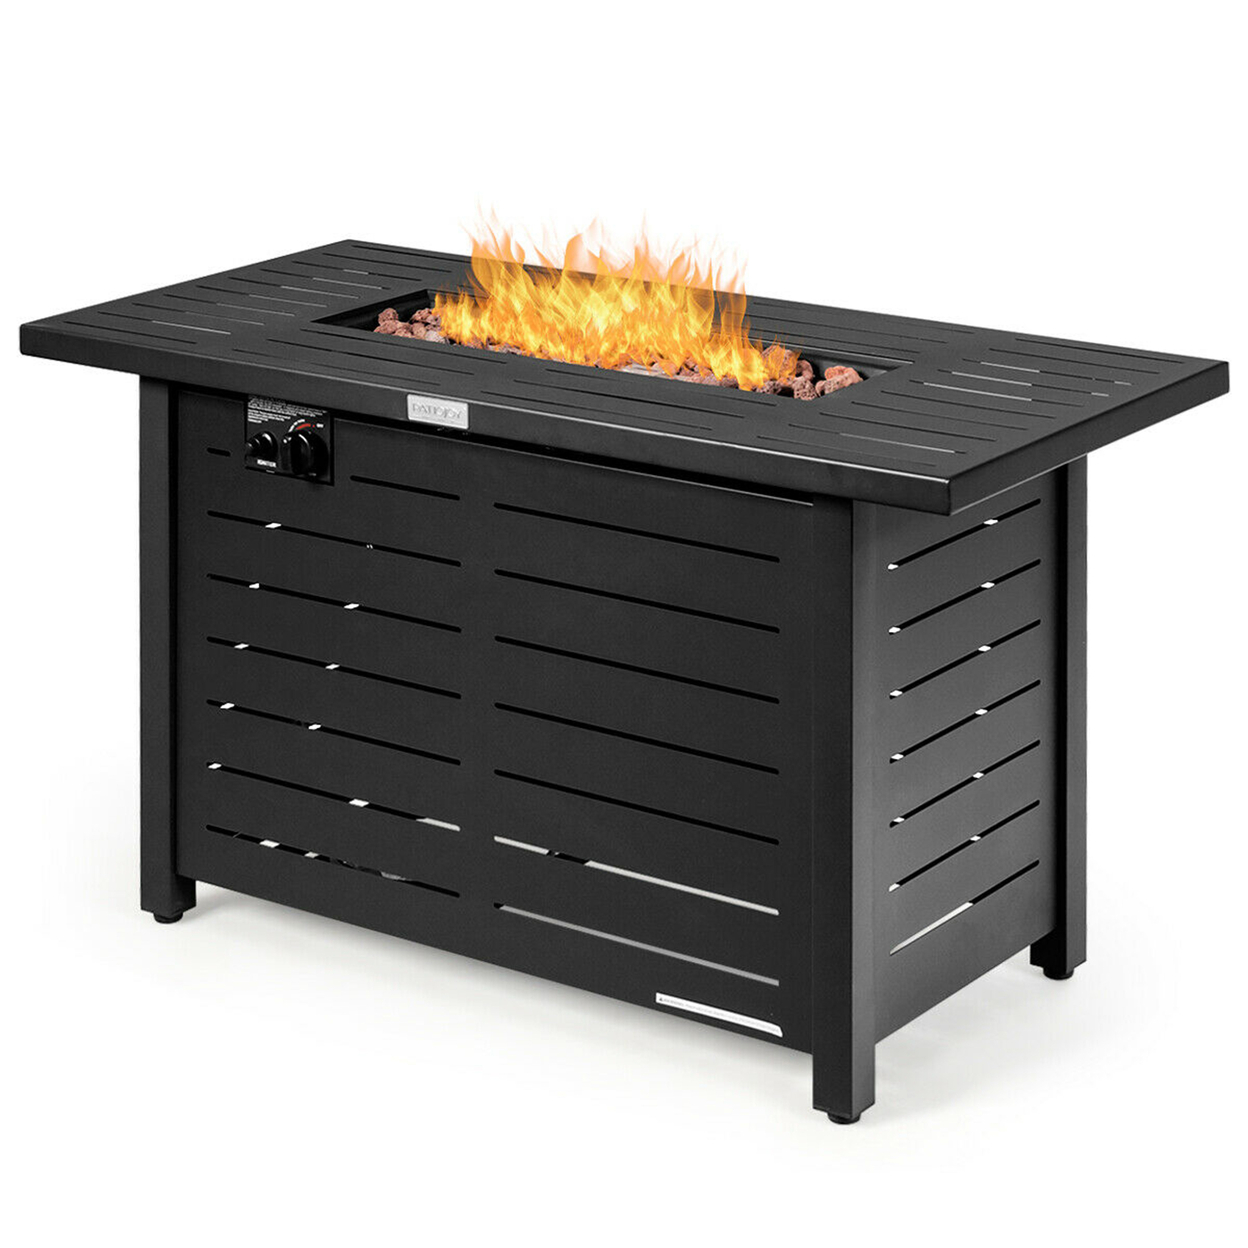 42'' Rectangular Propane Gas Fire Pit 60,000 Btu Heater Outdoor Table W/ Cover